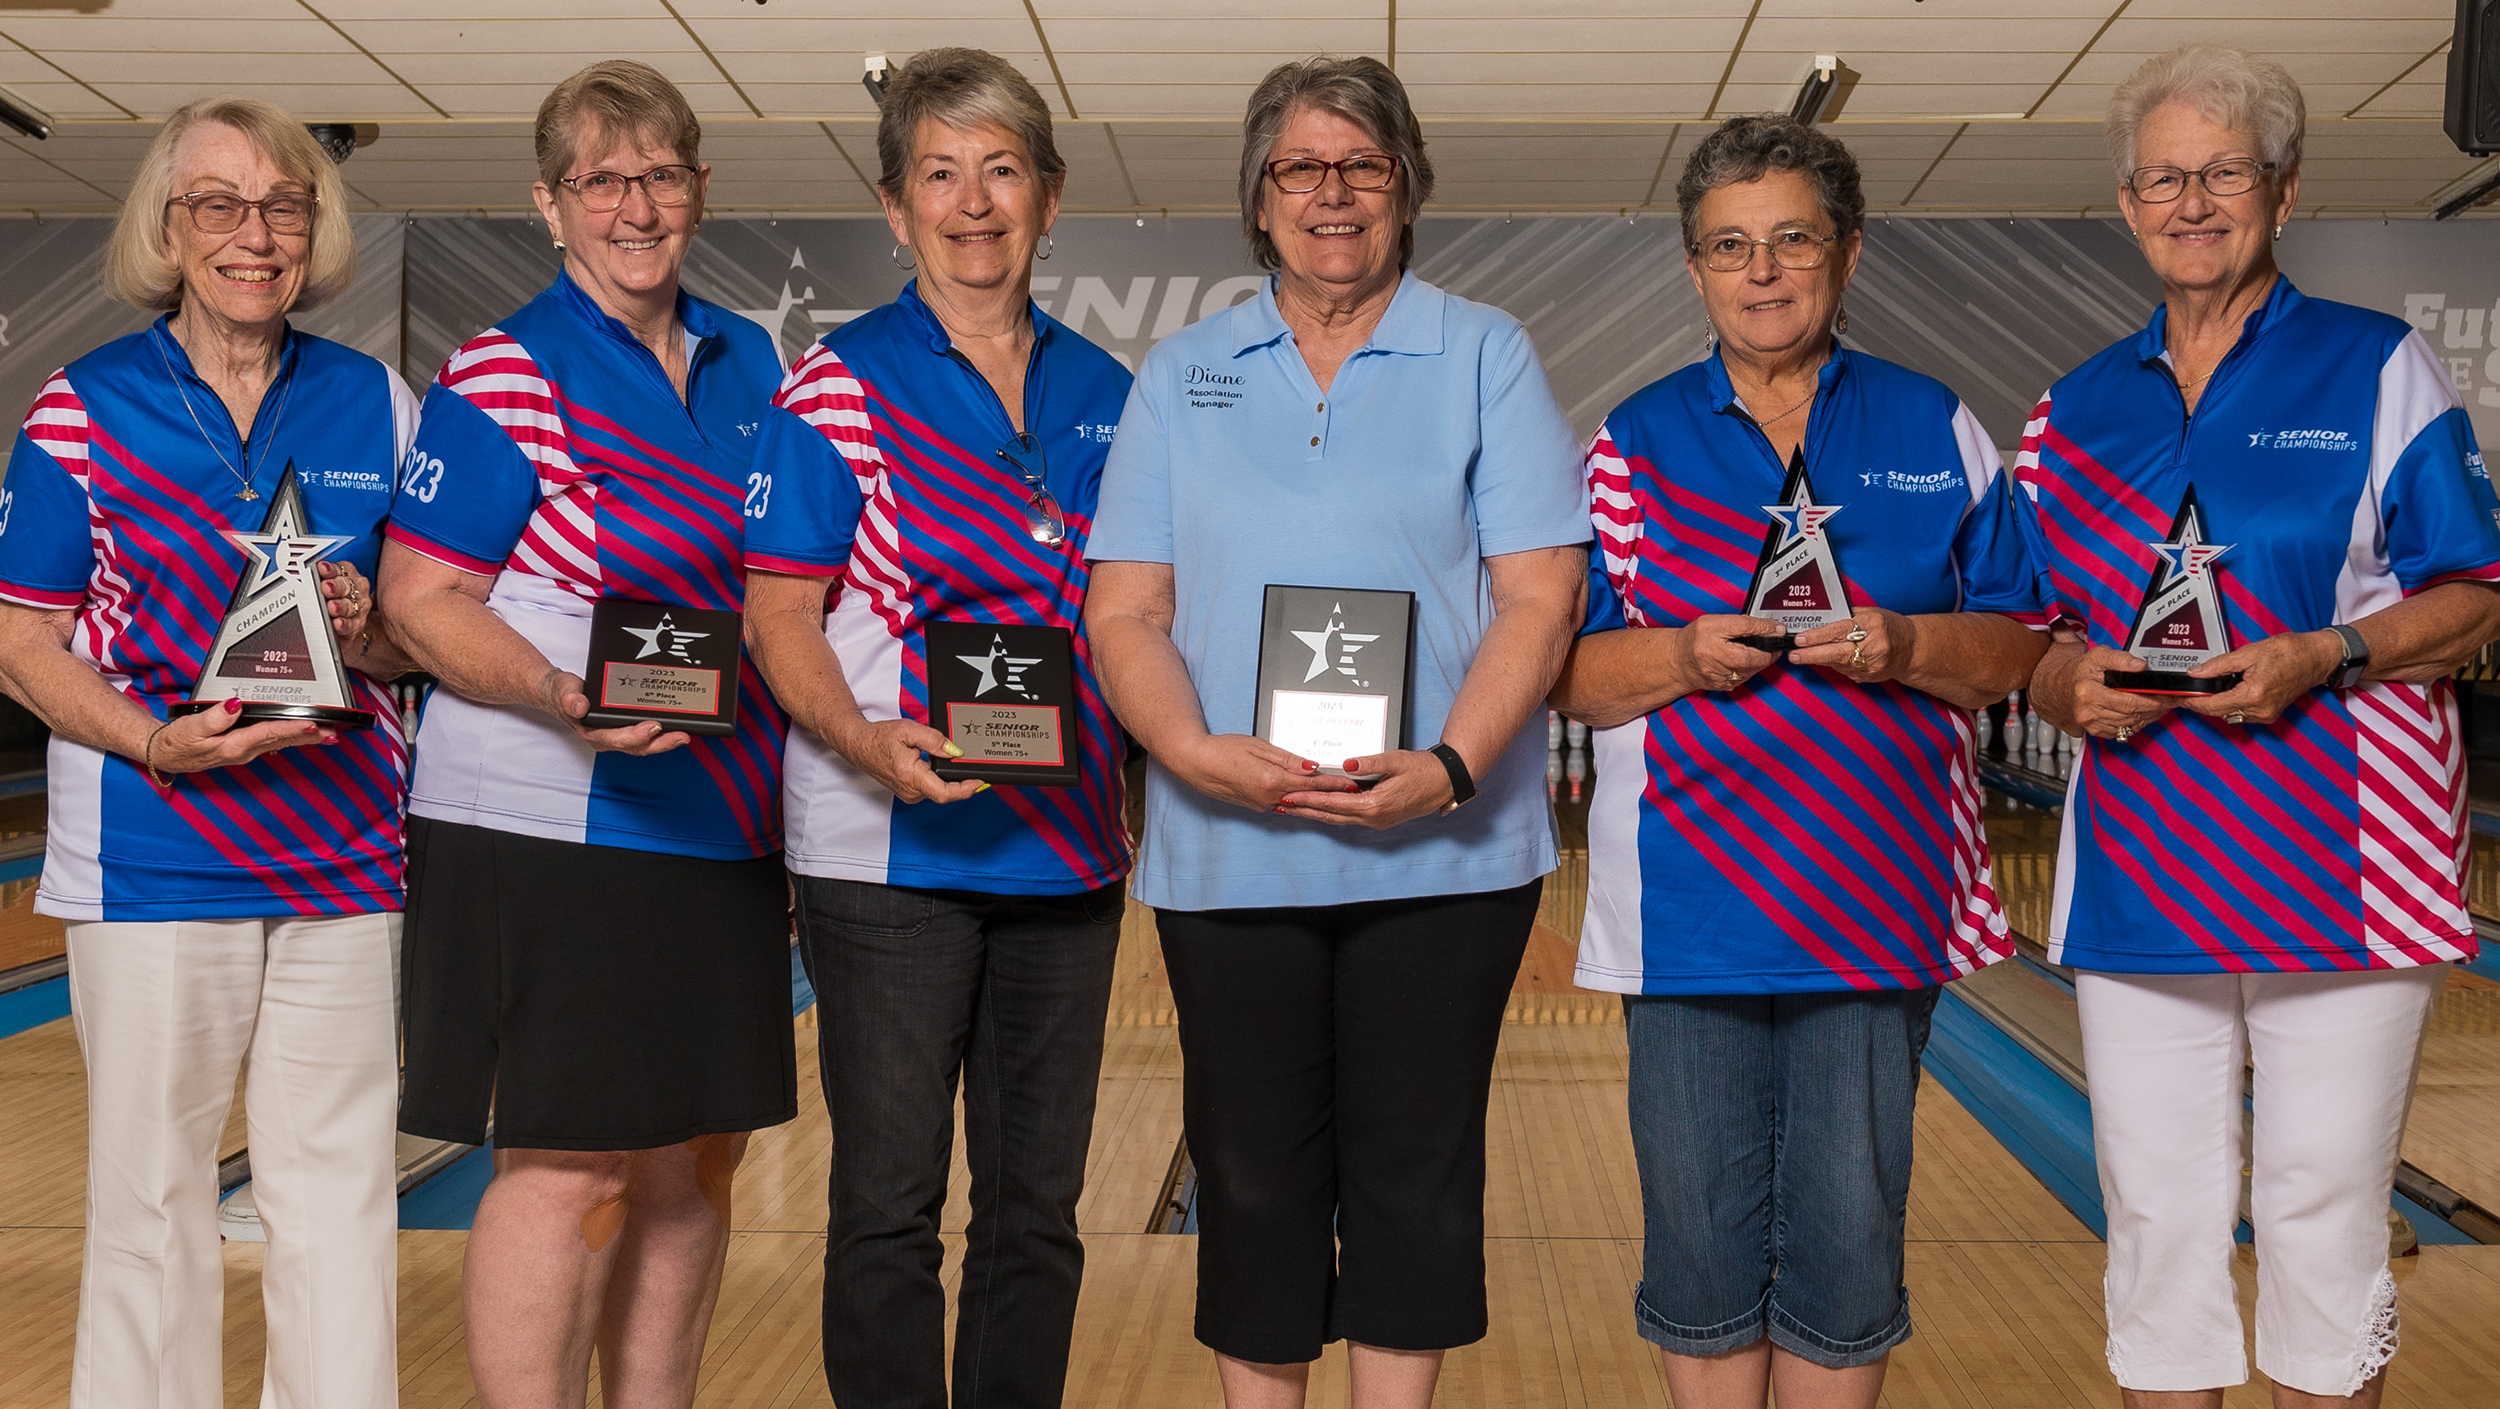 The top six finishers in Women's 75 and older at the 2023 USBC Senior Championships.